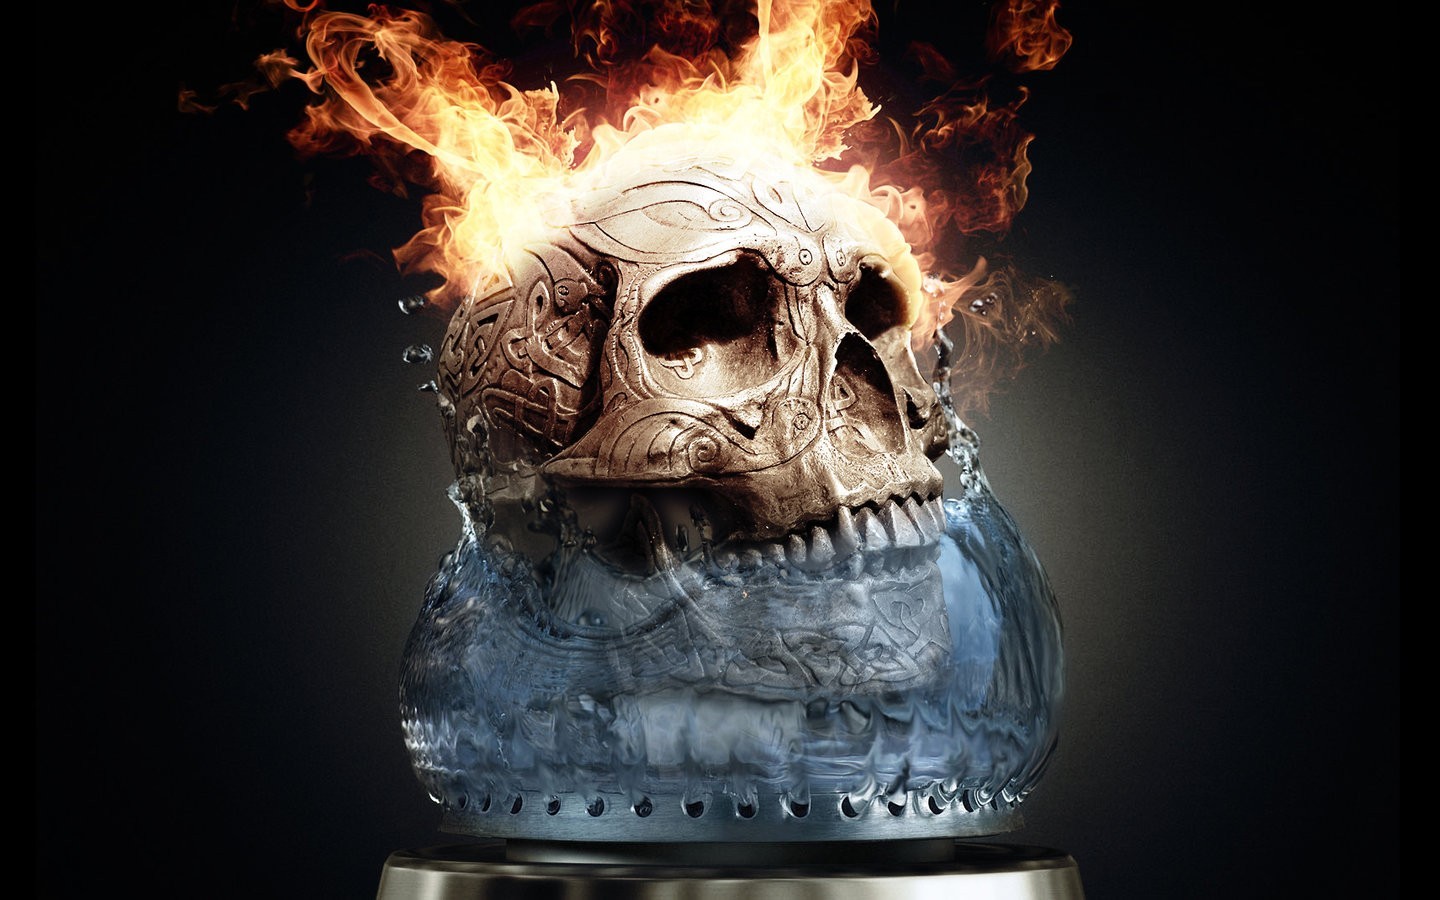 objects, death, skeletons, art, fire High Definition image